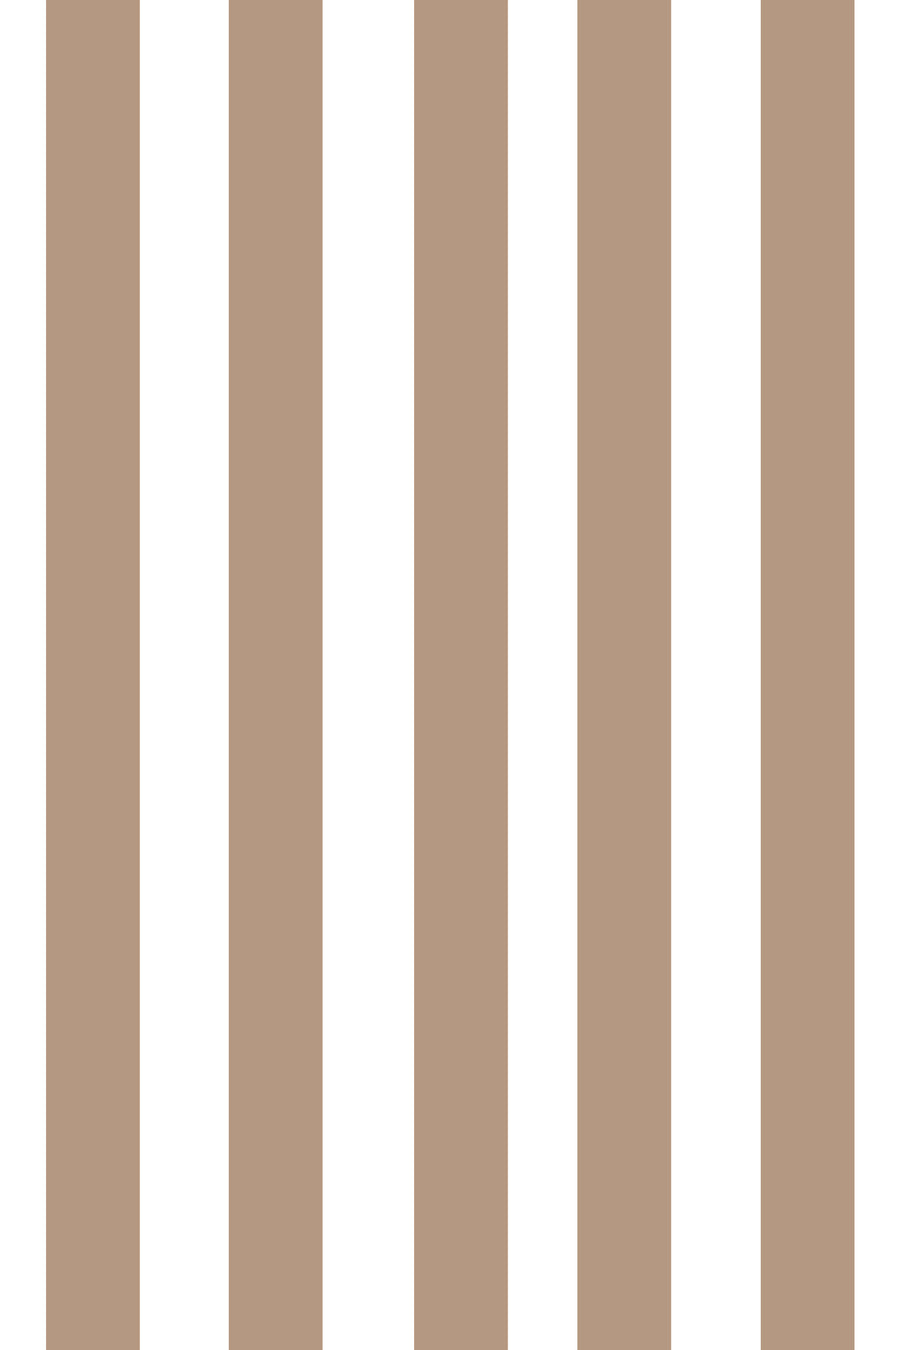 Woolf With Me Fitted Crib Sheet Stripes color_almond